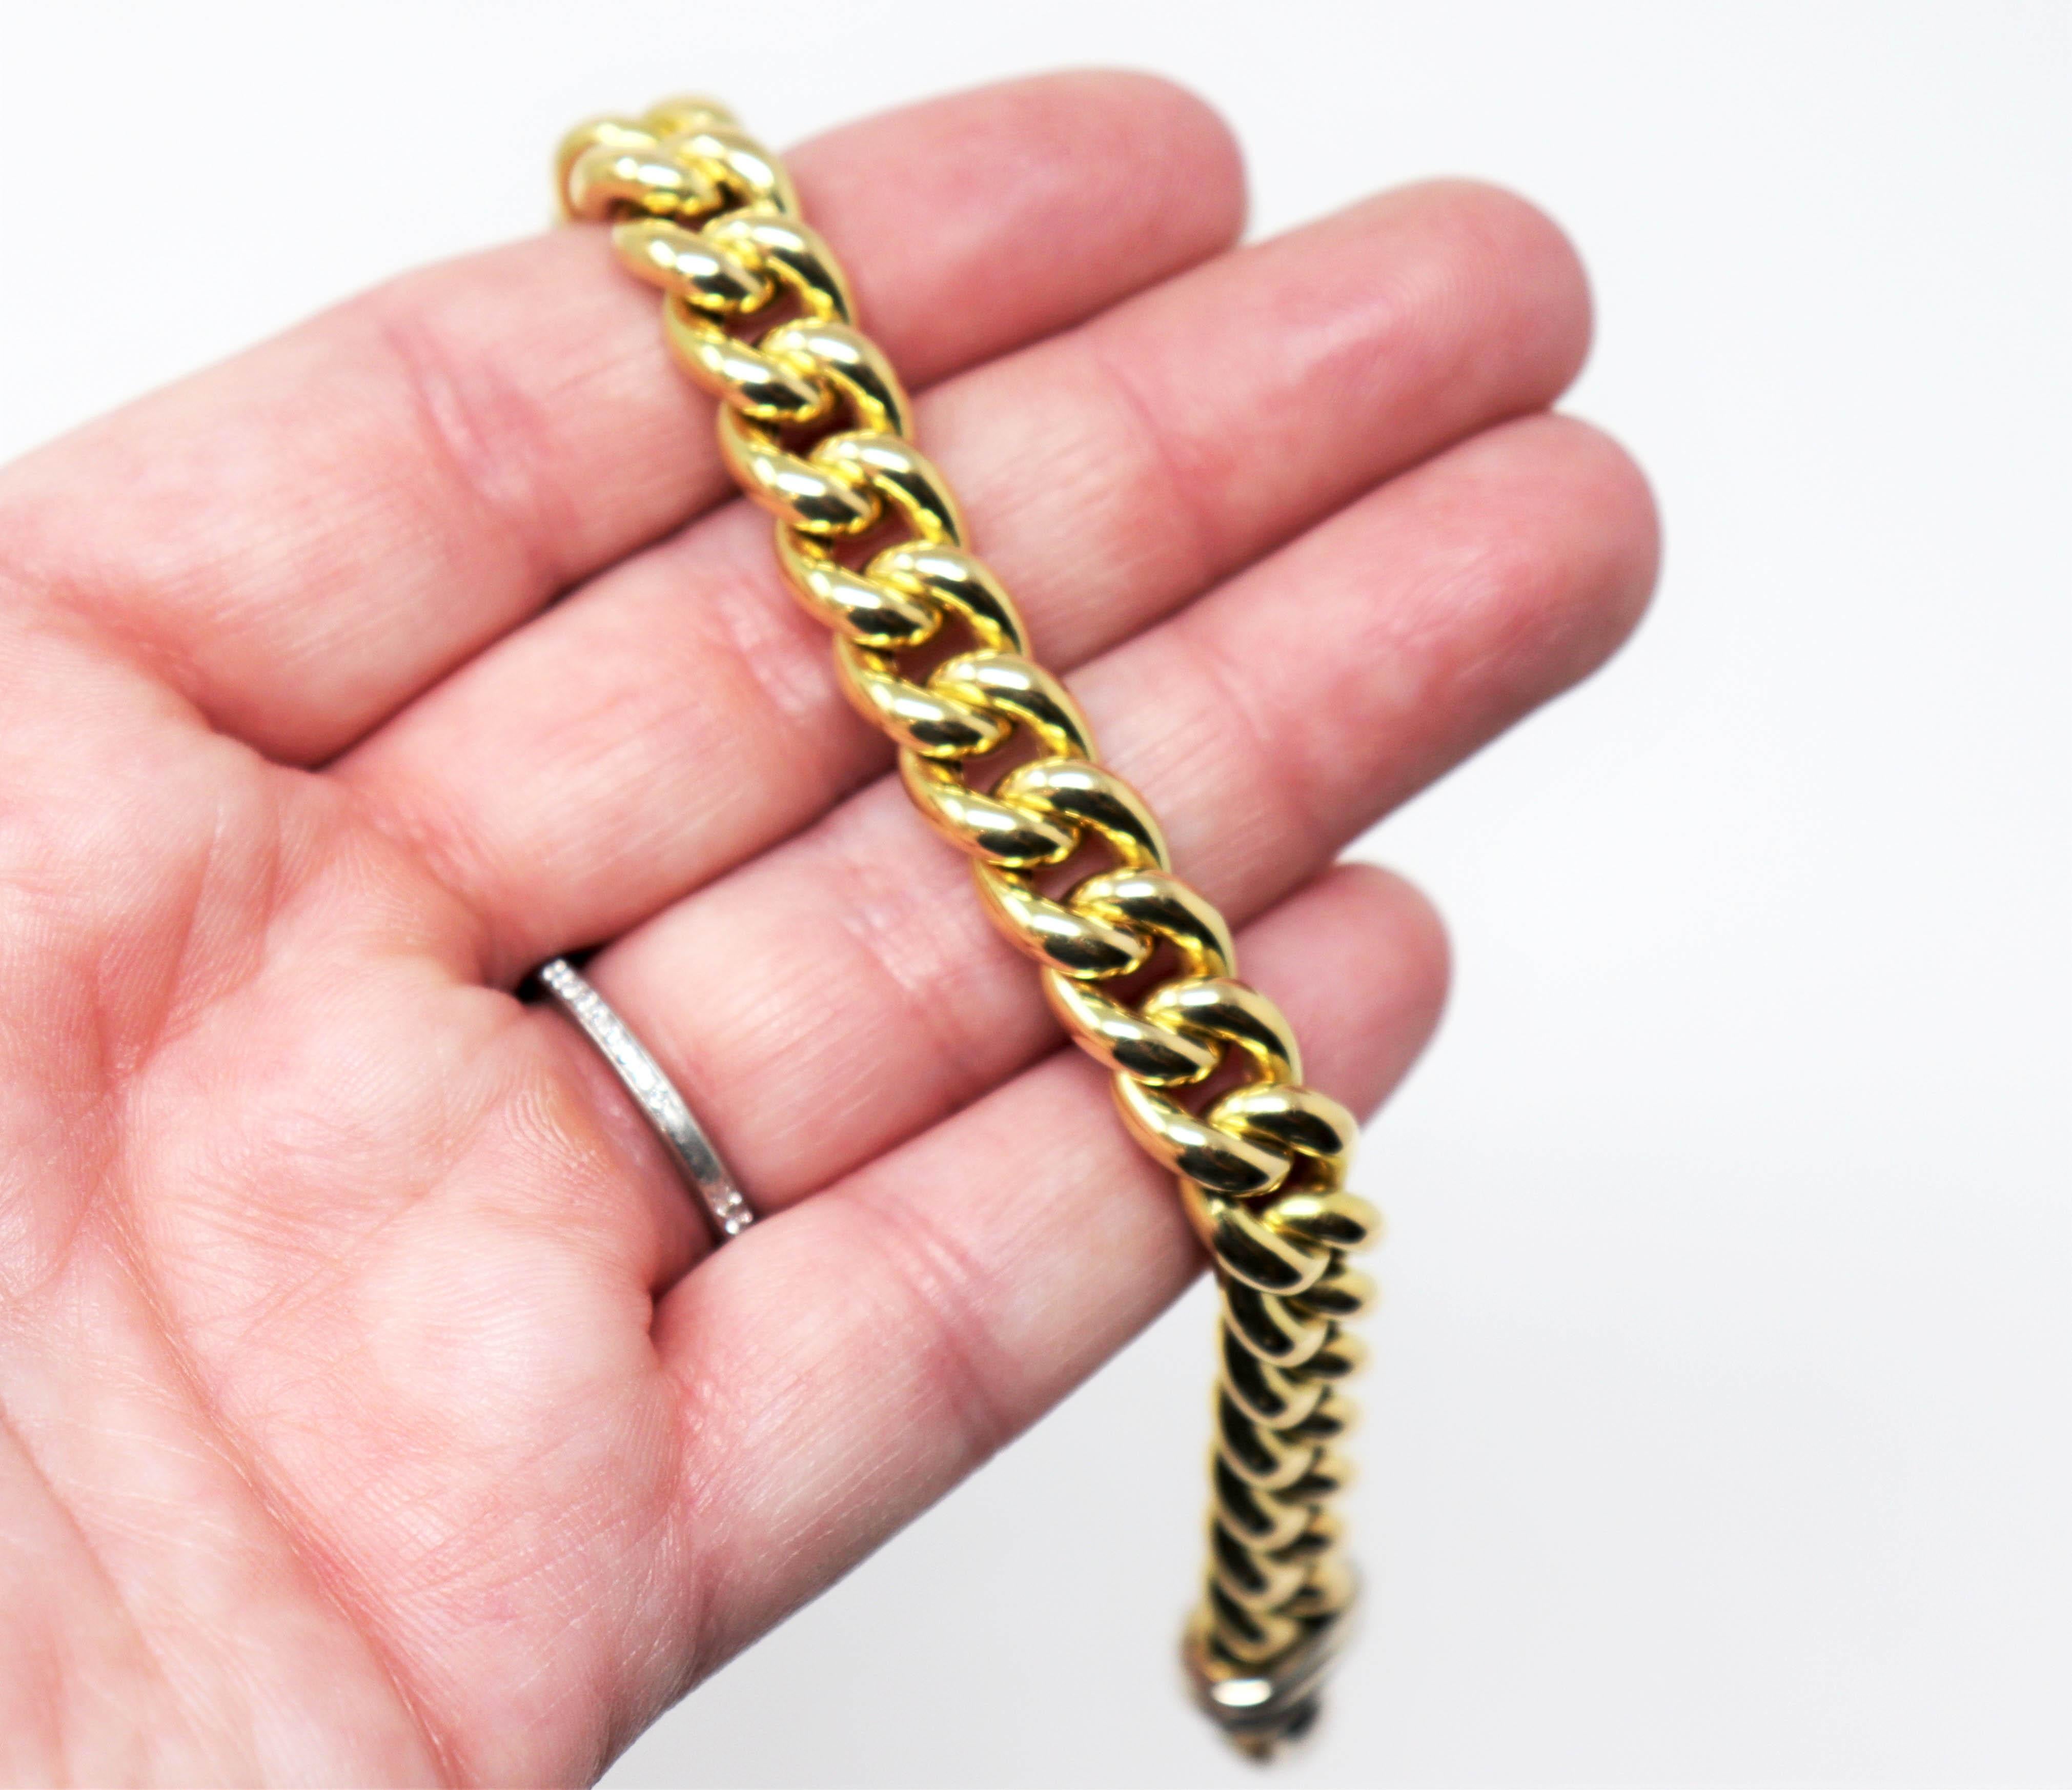 Signoretti Polished 18 Karat Yellow and White Gold Curb Chain Link Bracelet 5